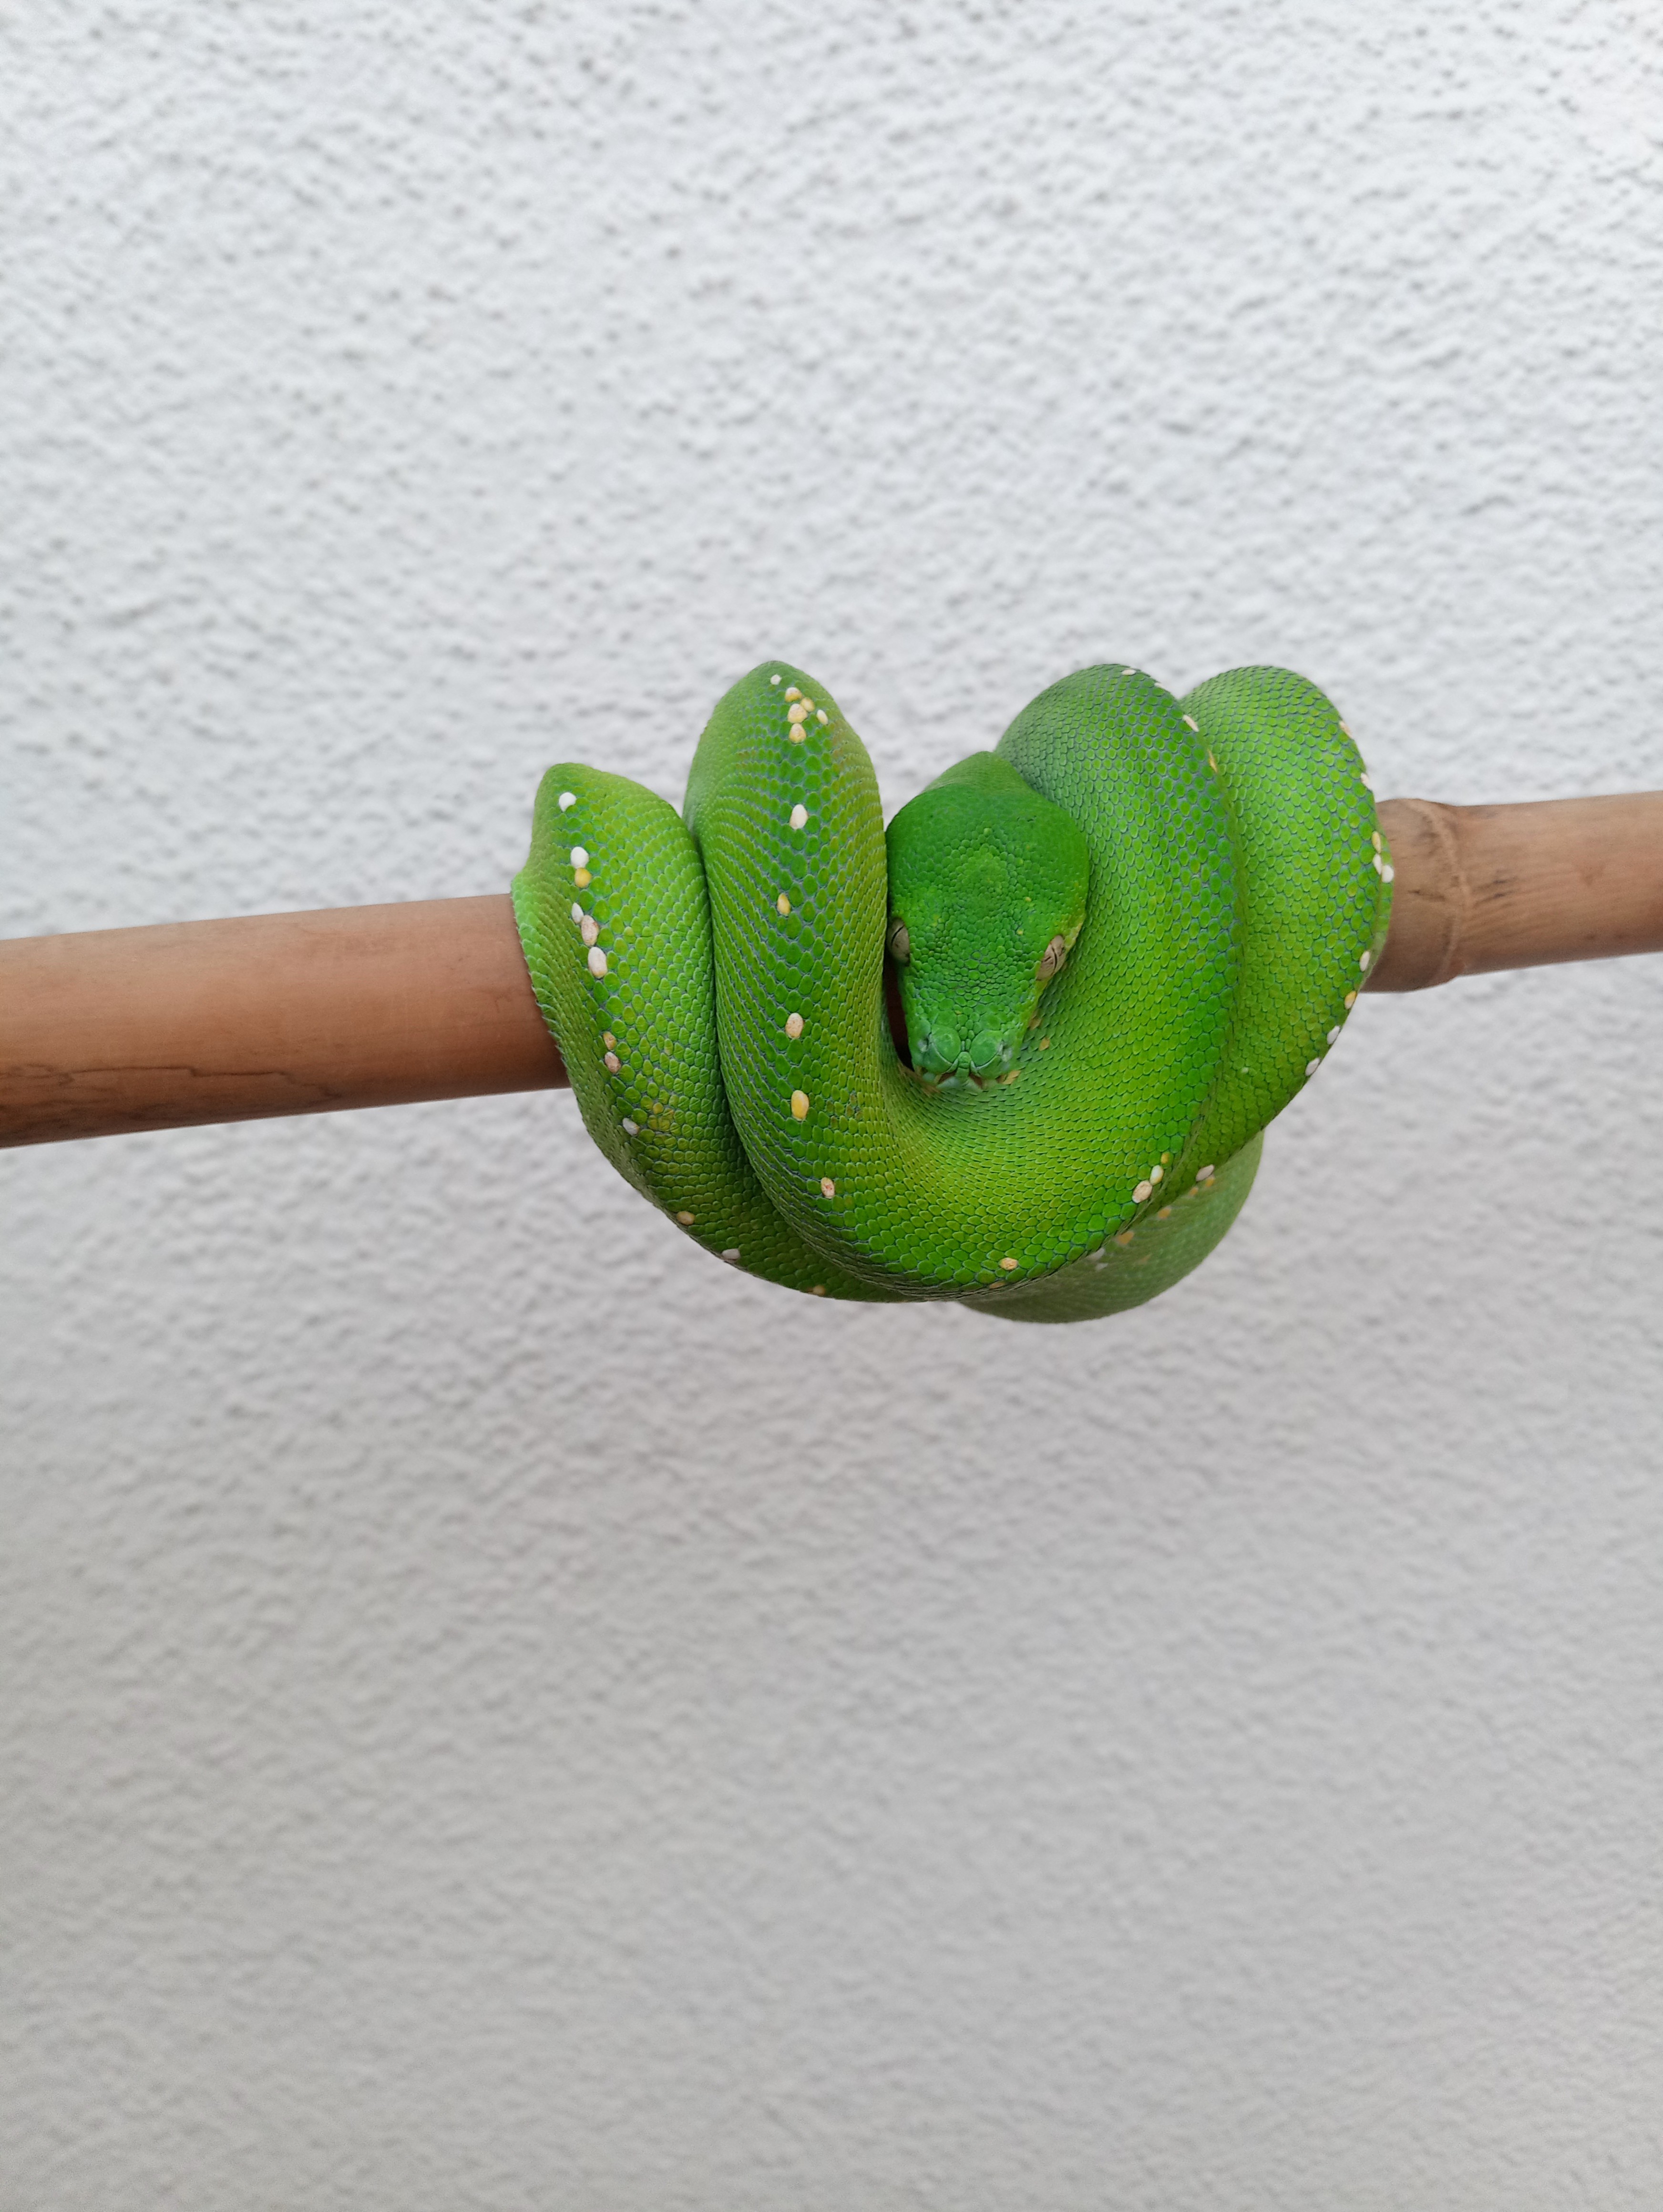 Aru Green Tree Python by Epic Ectotherms